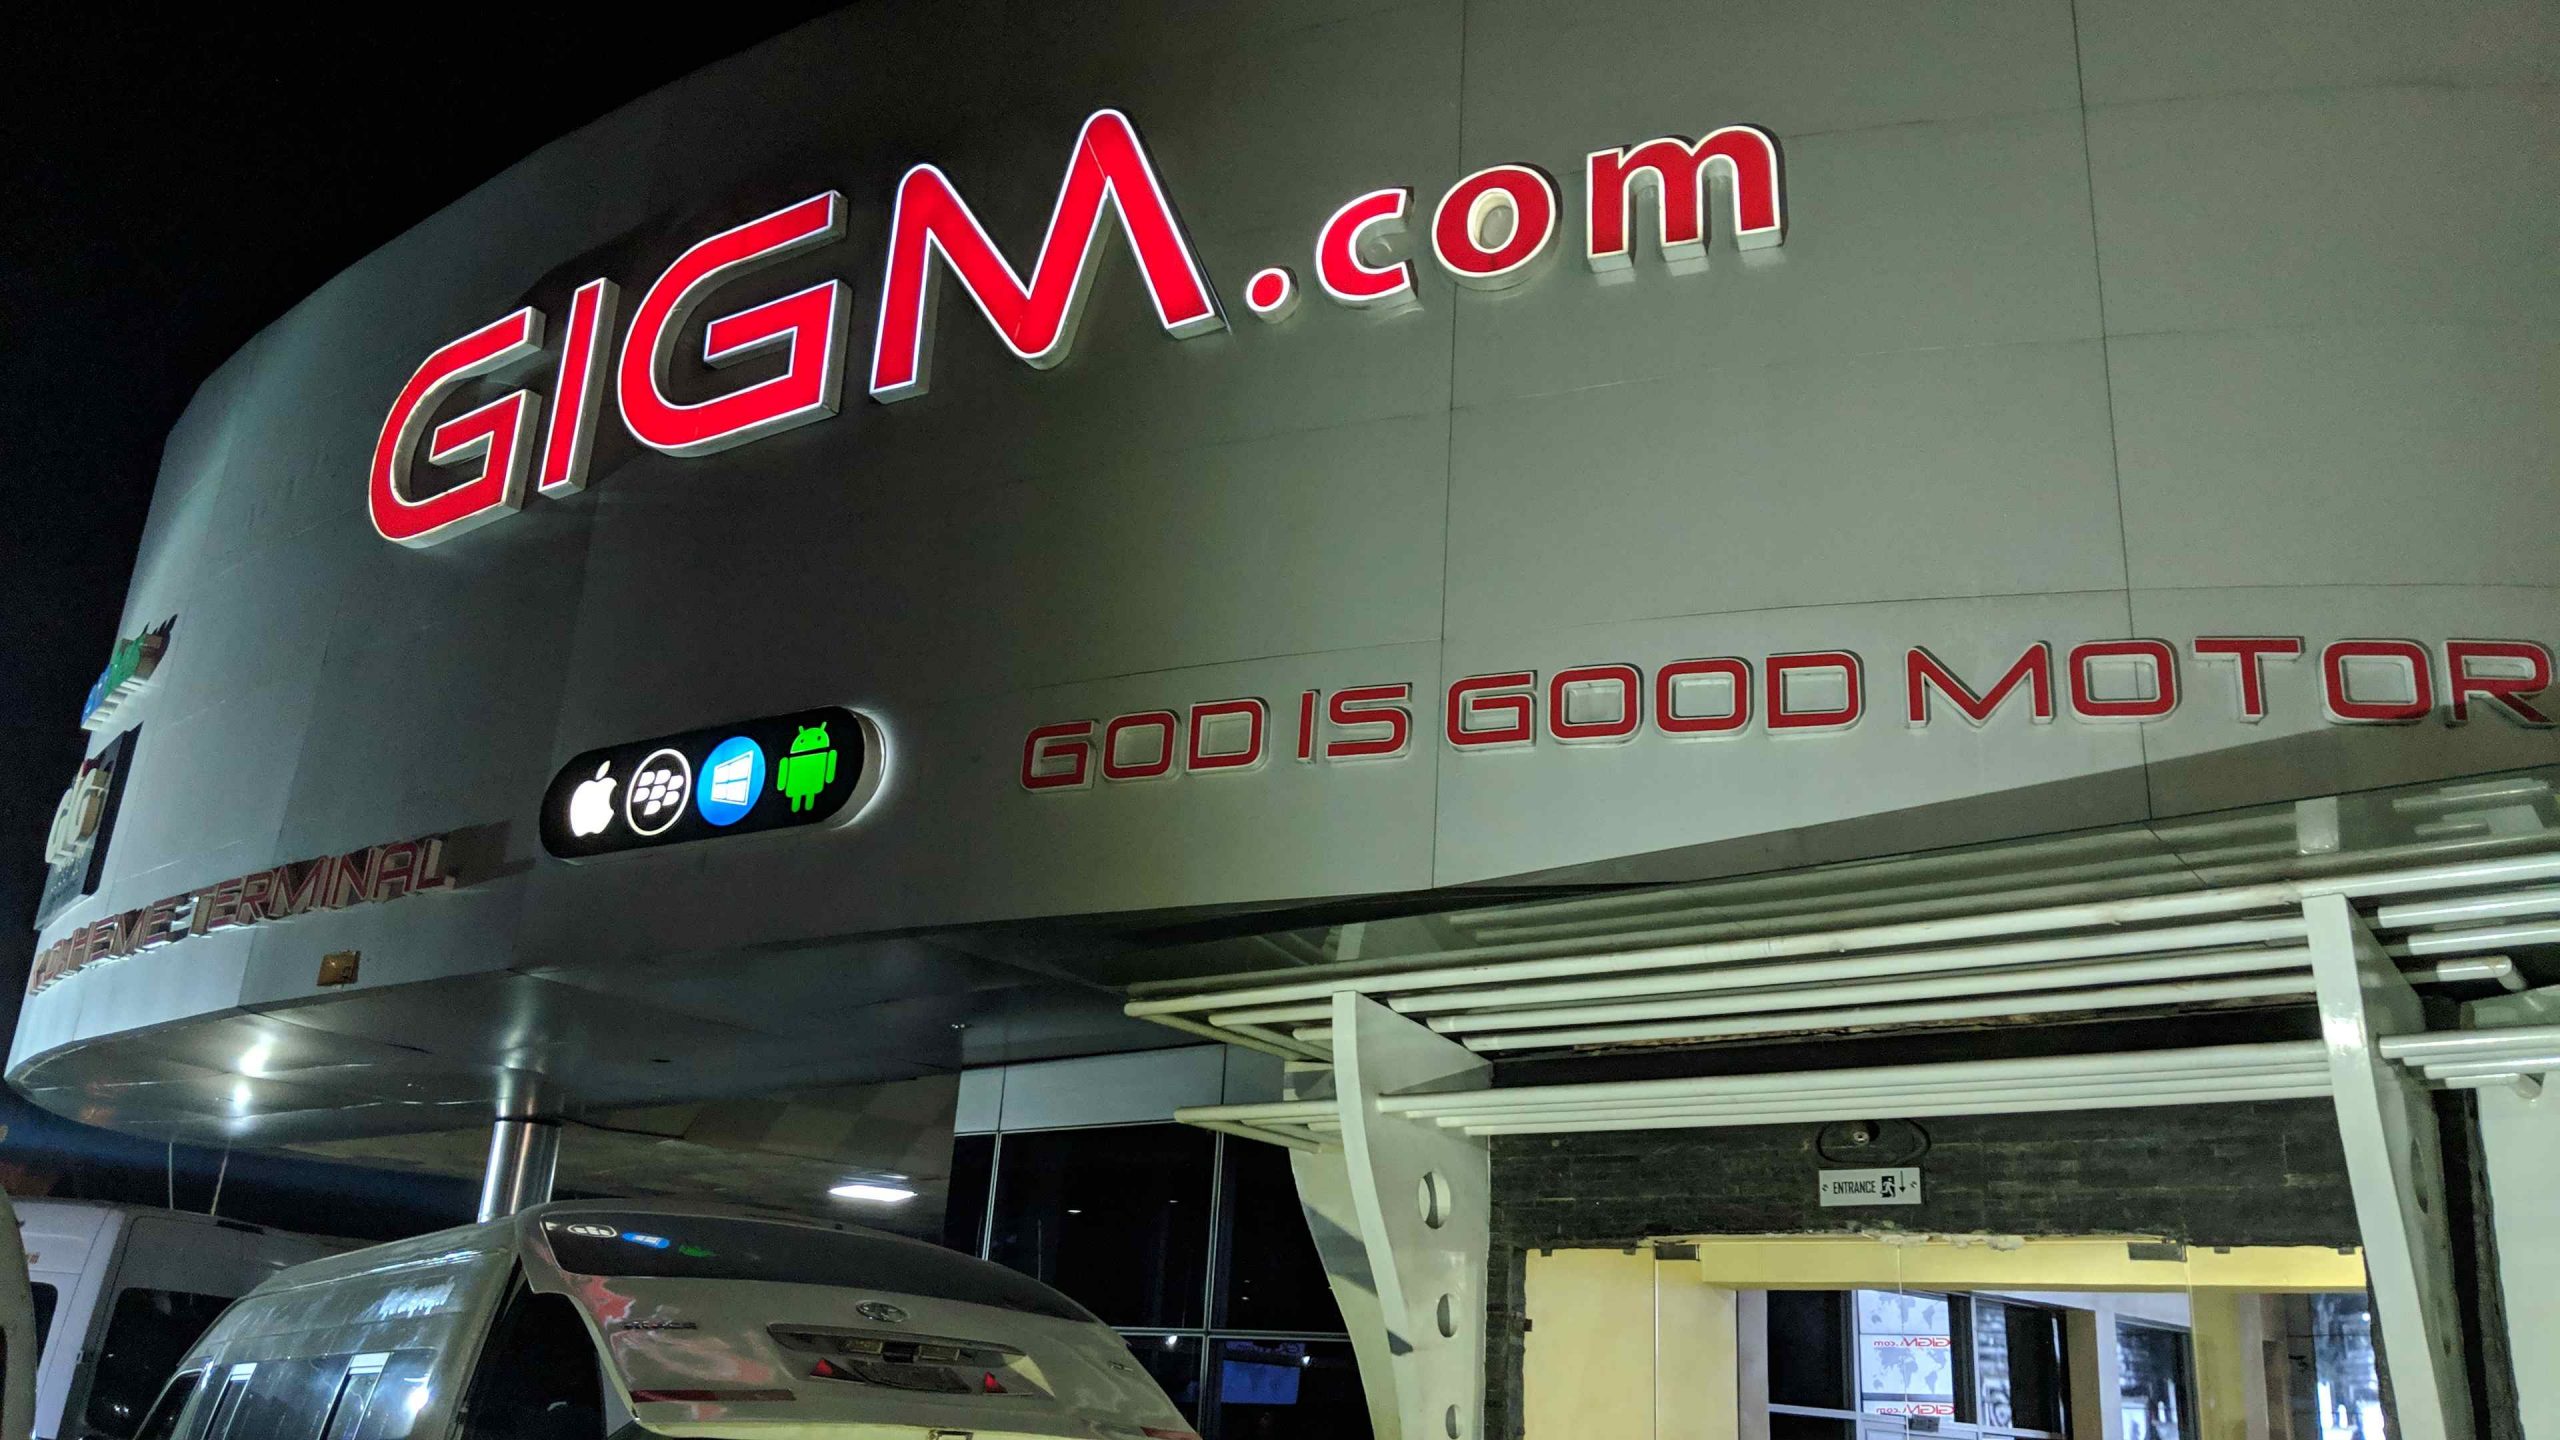 God is Good (GIGM) Online Booking: Prices, Routes Prices, Contacts & Terminals